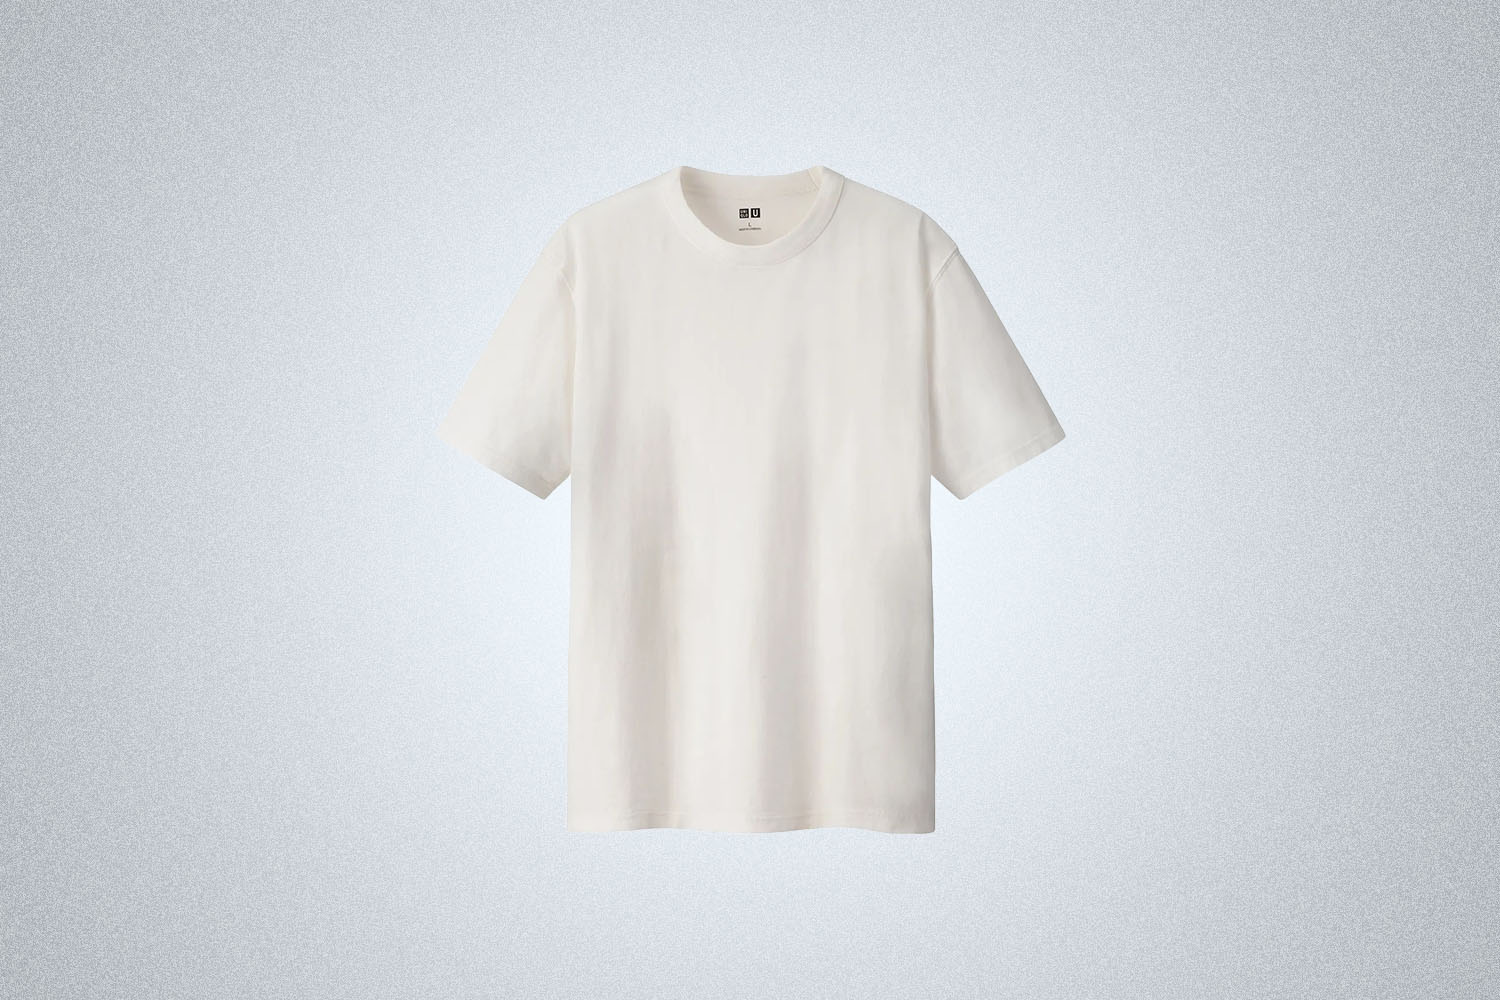 A Uniqlo White T-Shirt on gray background